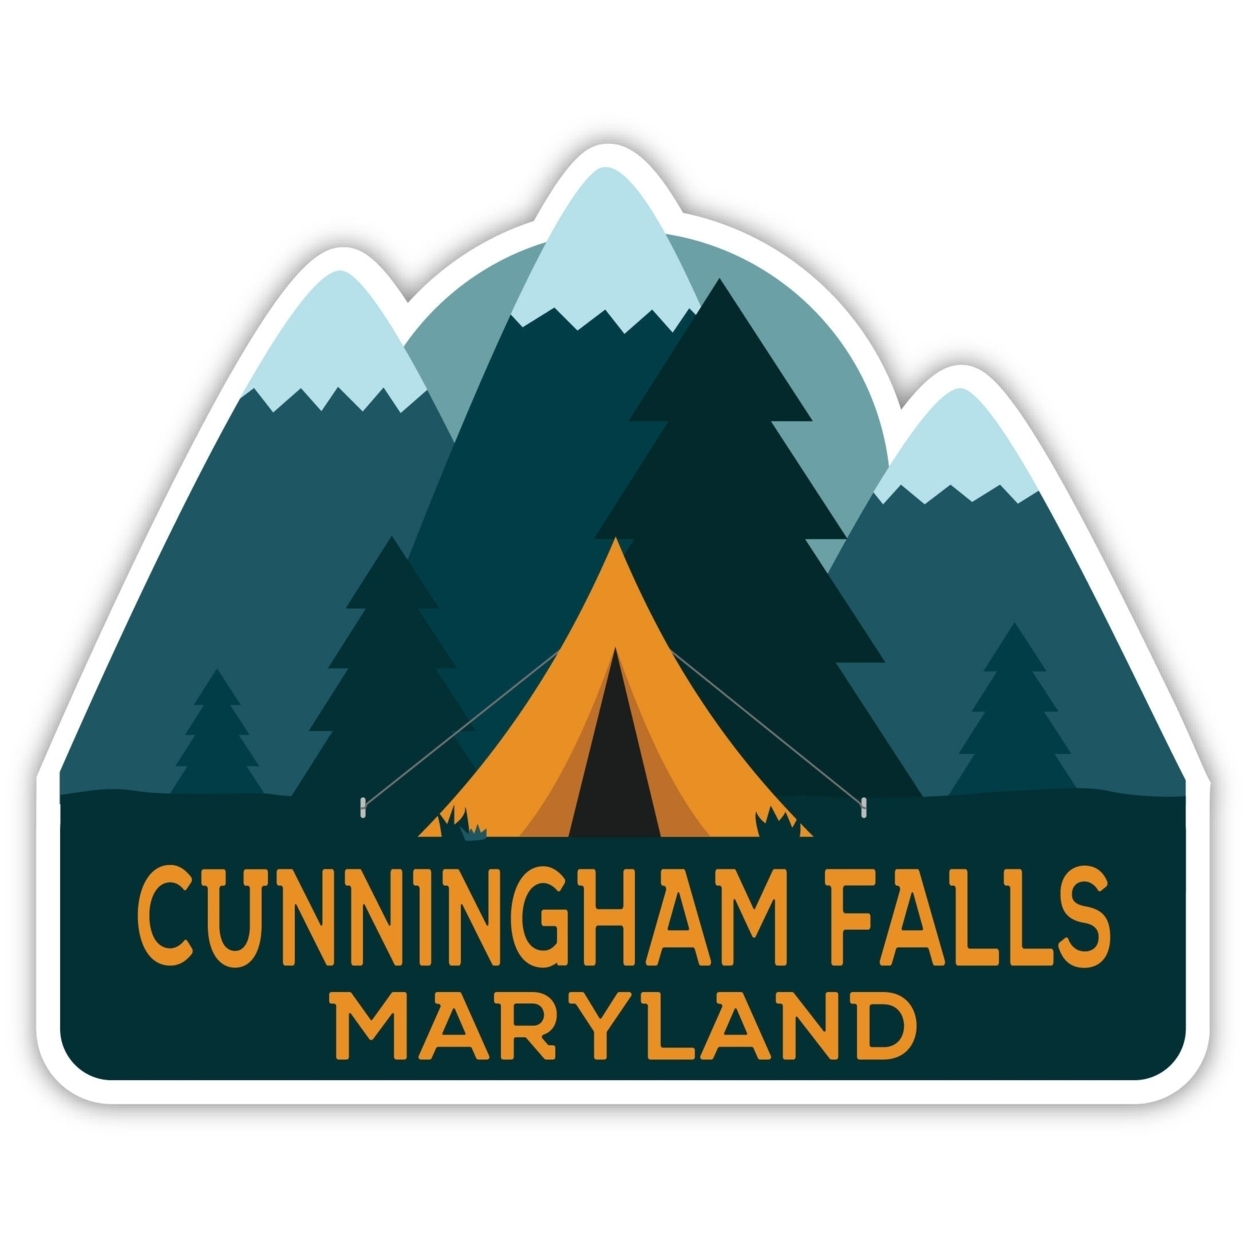 Cunningham Falls Maryland Souvenir Decorative Stickers (Choose Theme And Size) - 4-Pack, 6-Inch, Tent